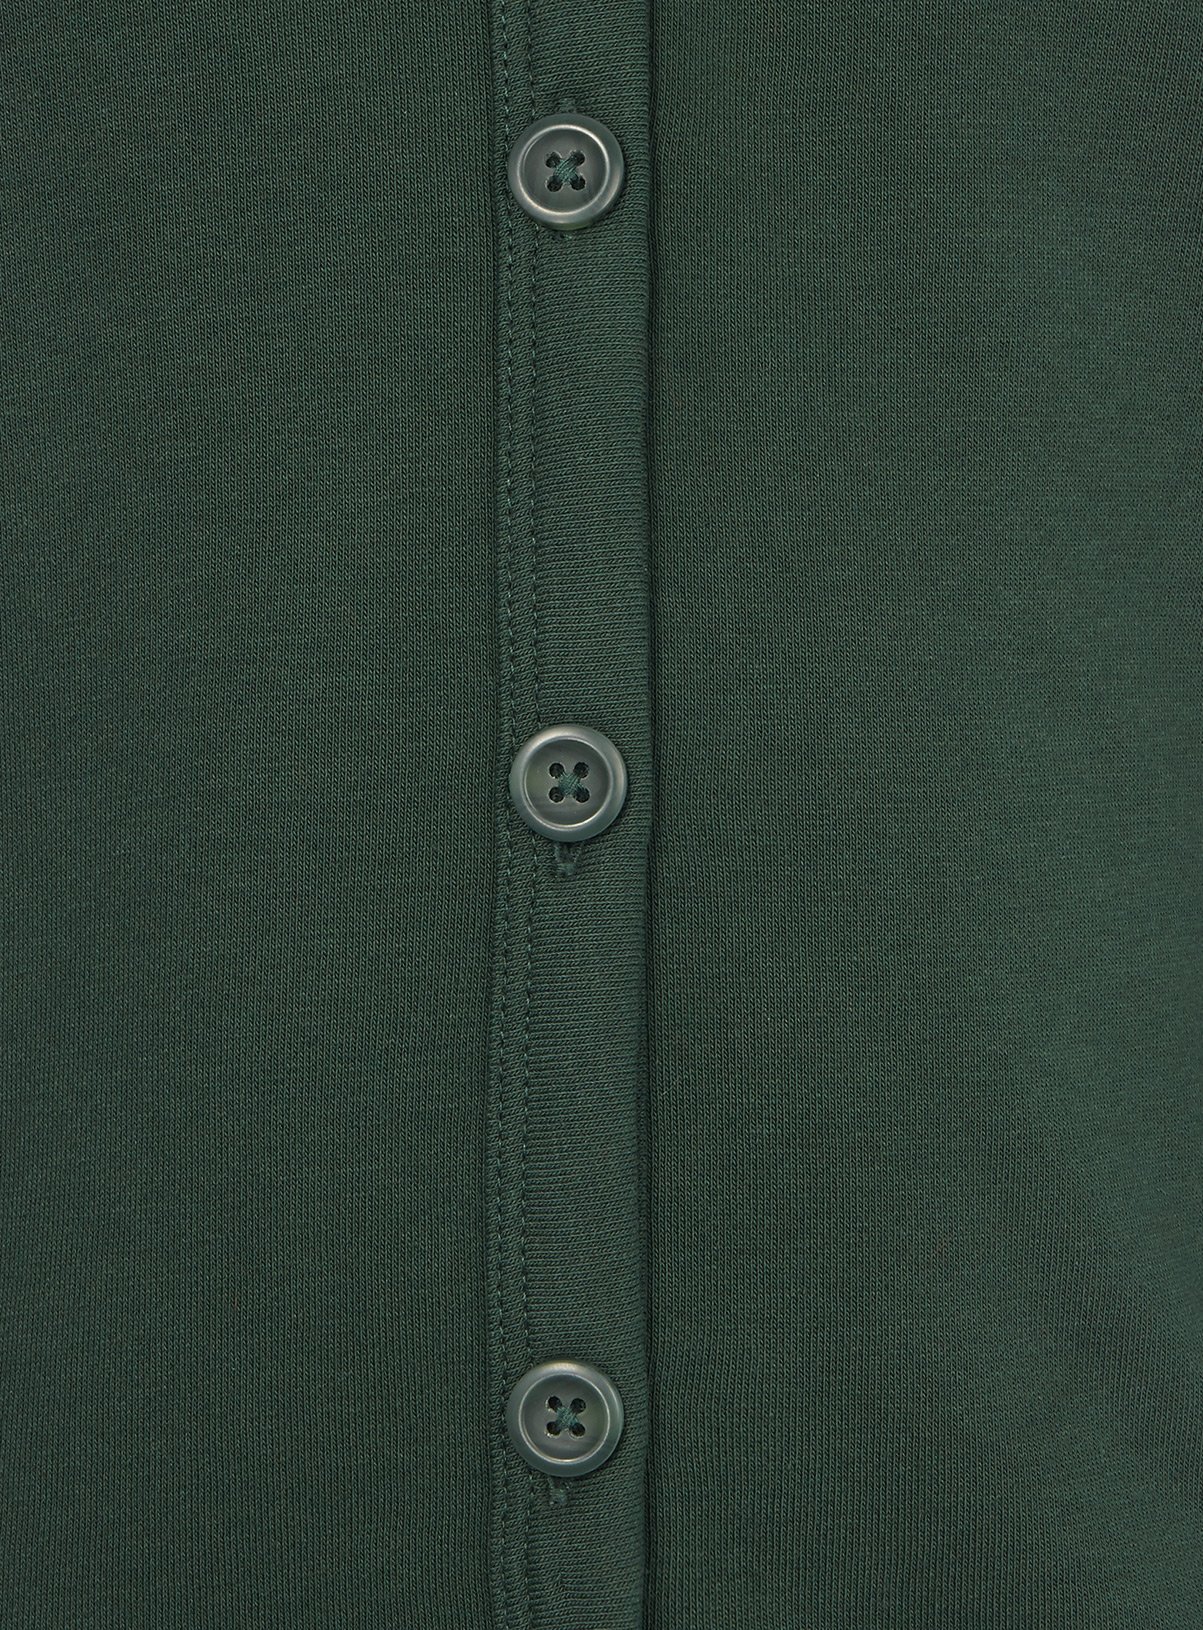 Green Sweat Cardigans 2 Pack Review